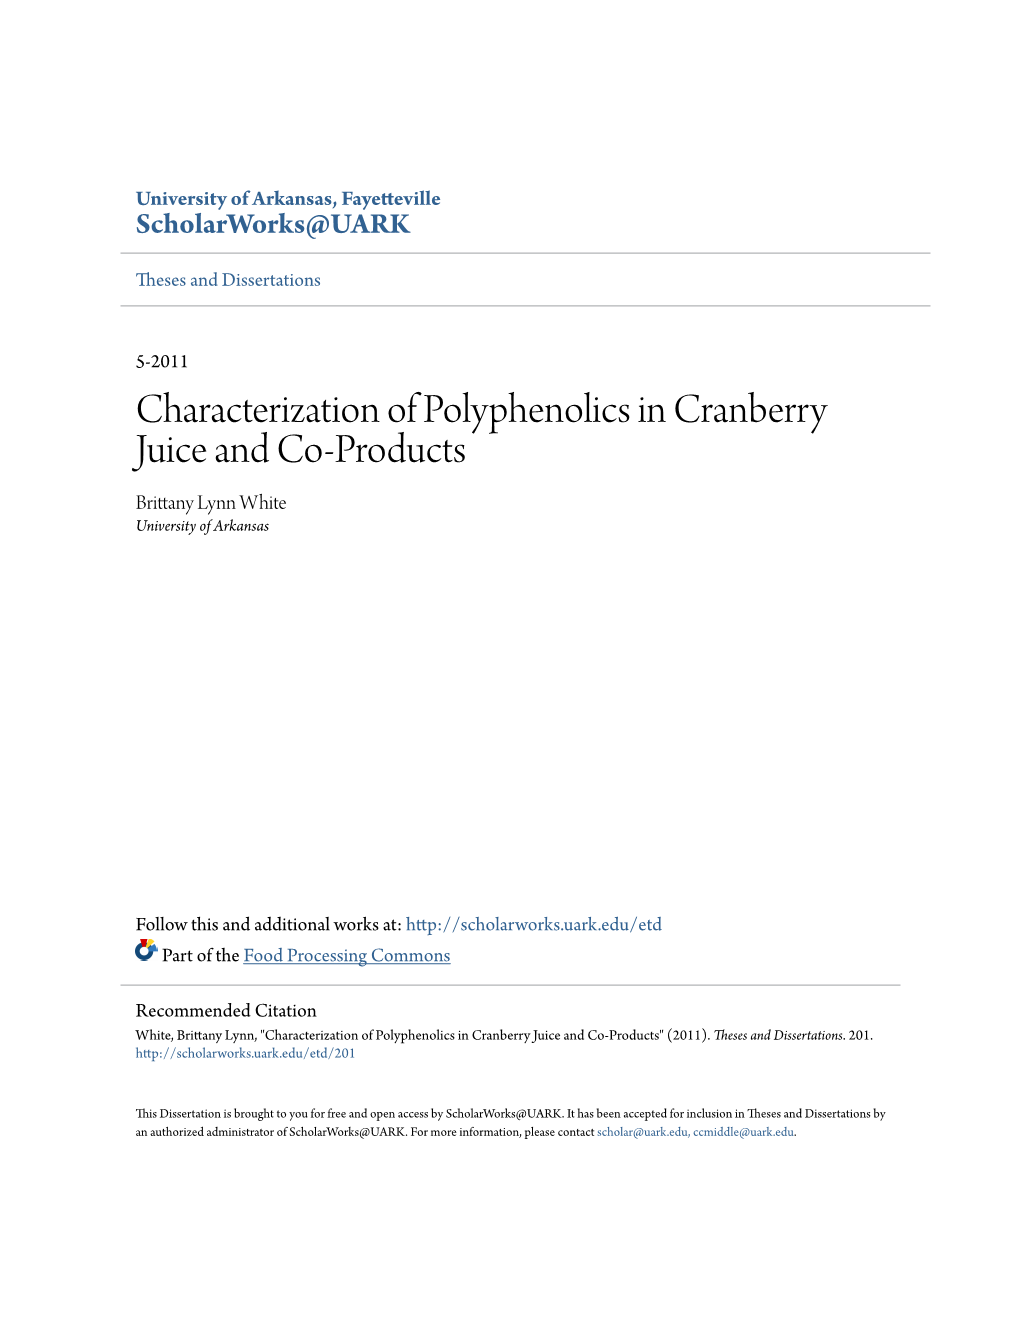 Characterization of Polyphenolics in Cranberry Juice and Co-Products Brittany Lynn White University of Arkansas